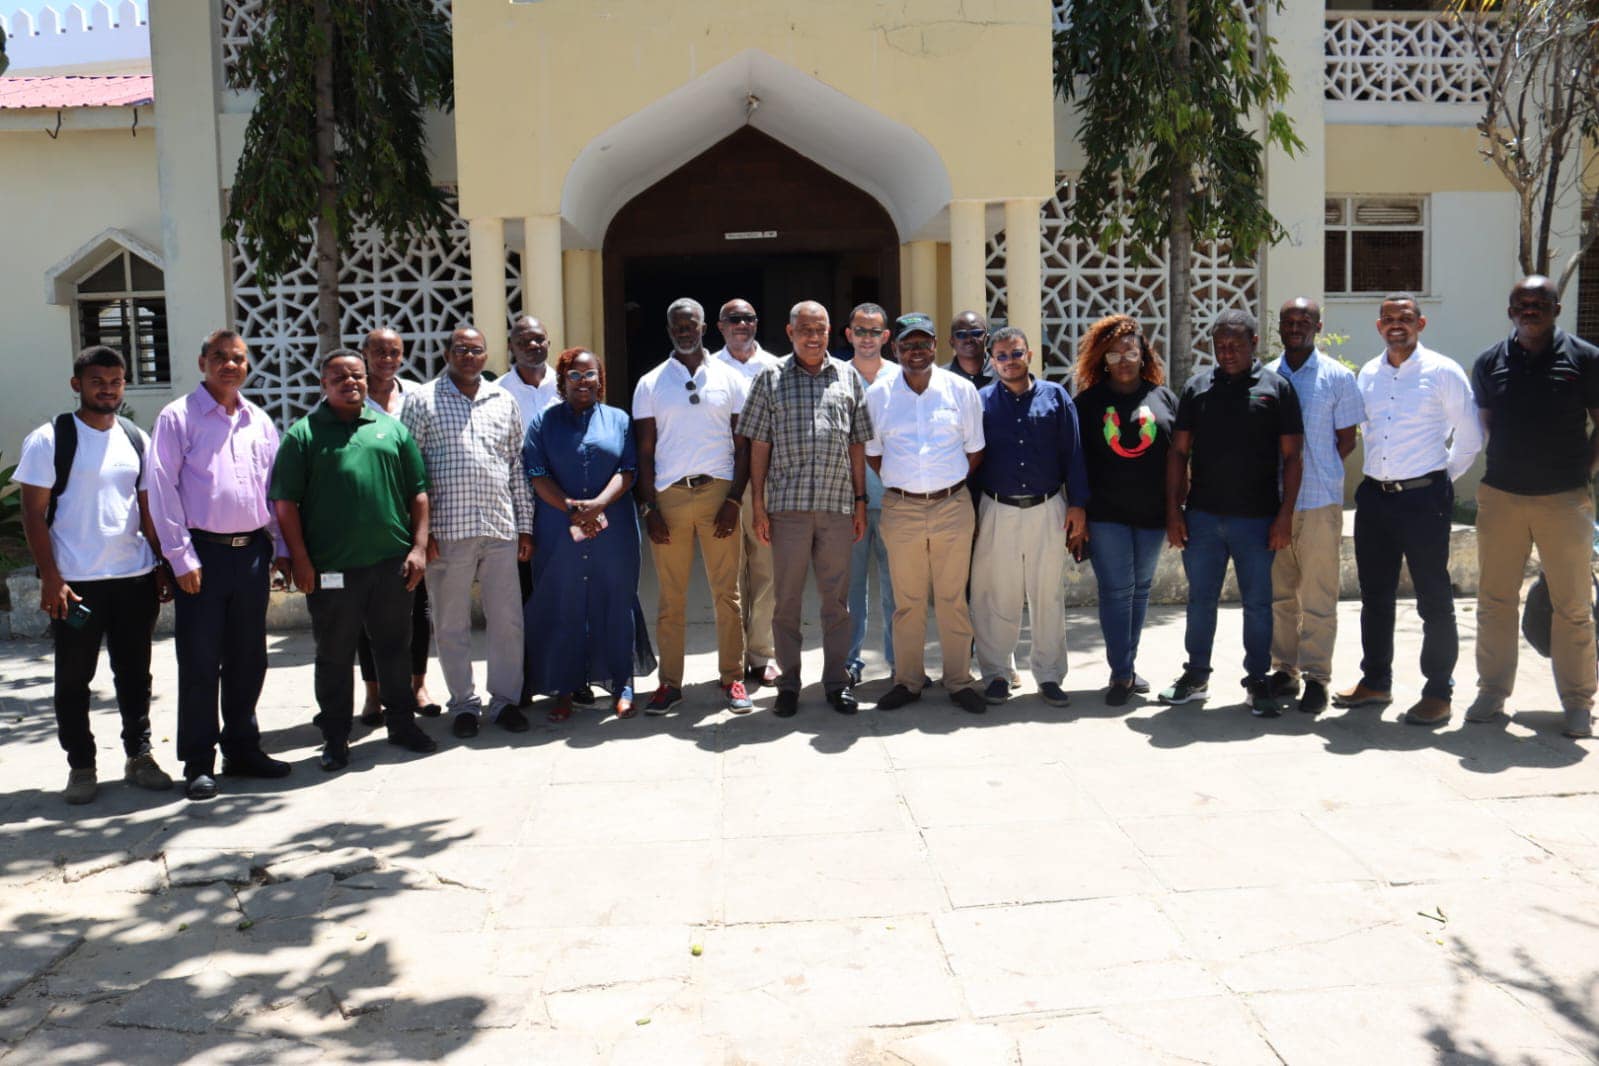 IMPROVING HEALTH SERVICES IN LAMU